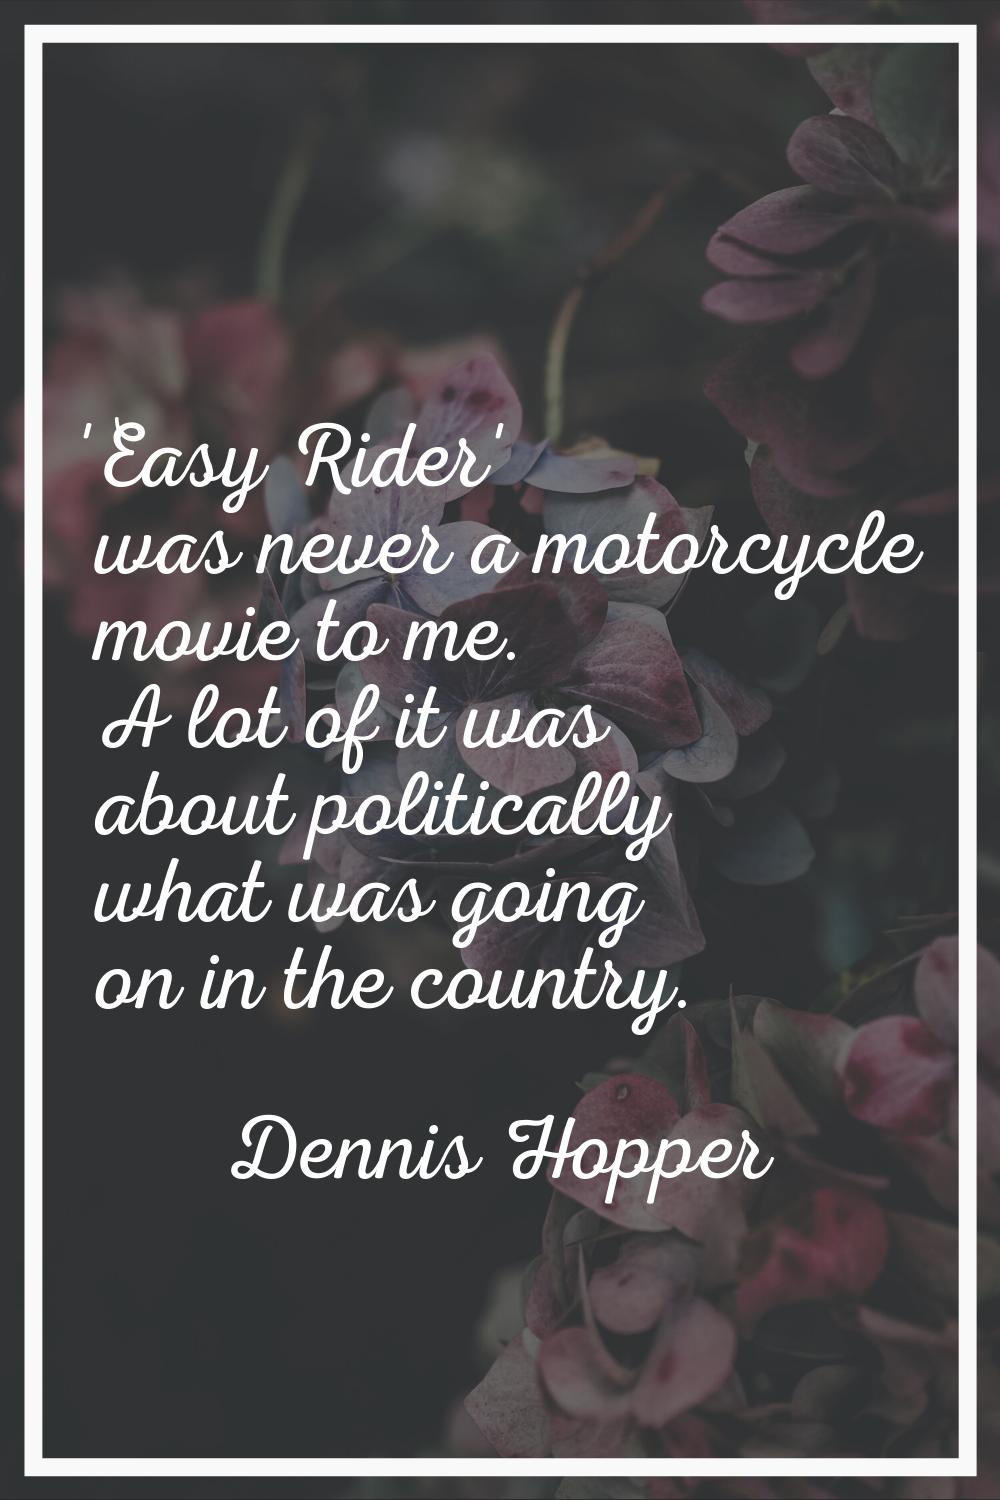 'Easy Rider' was never a motorcycle movie to me. A lot of it was about politically what was going o